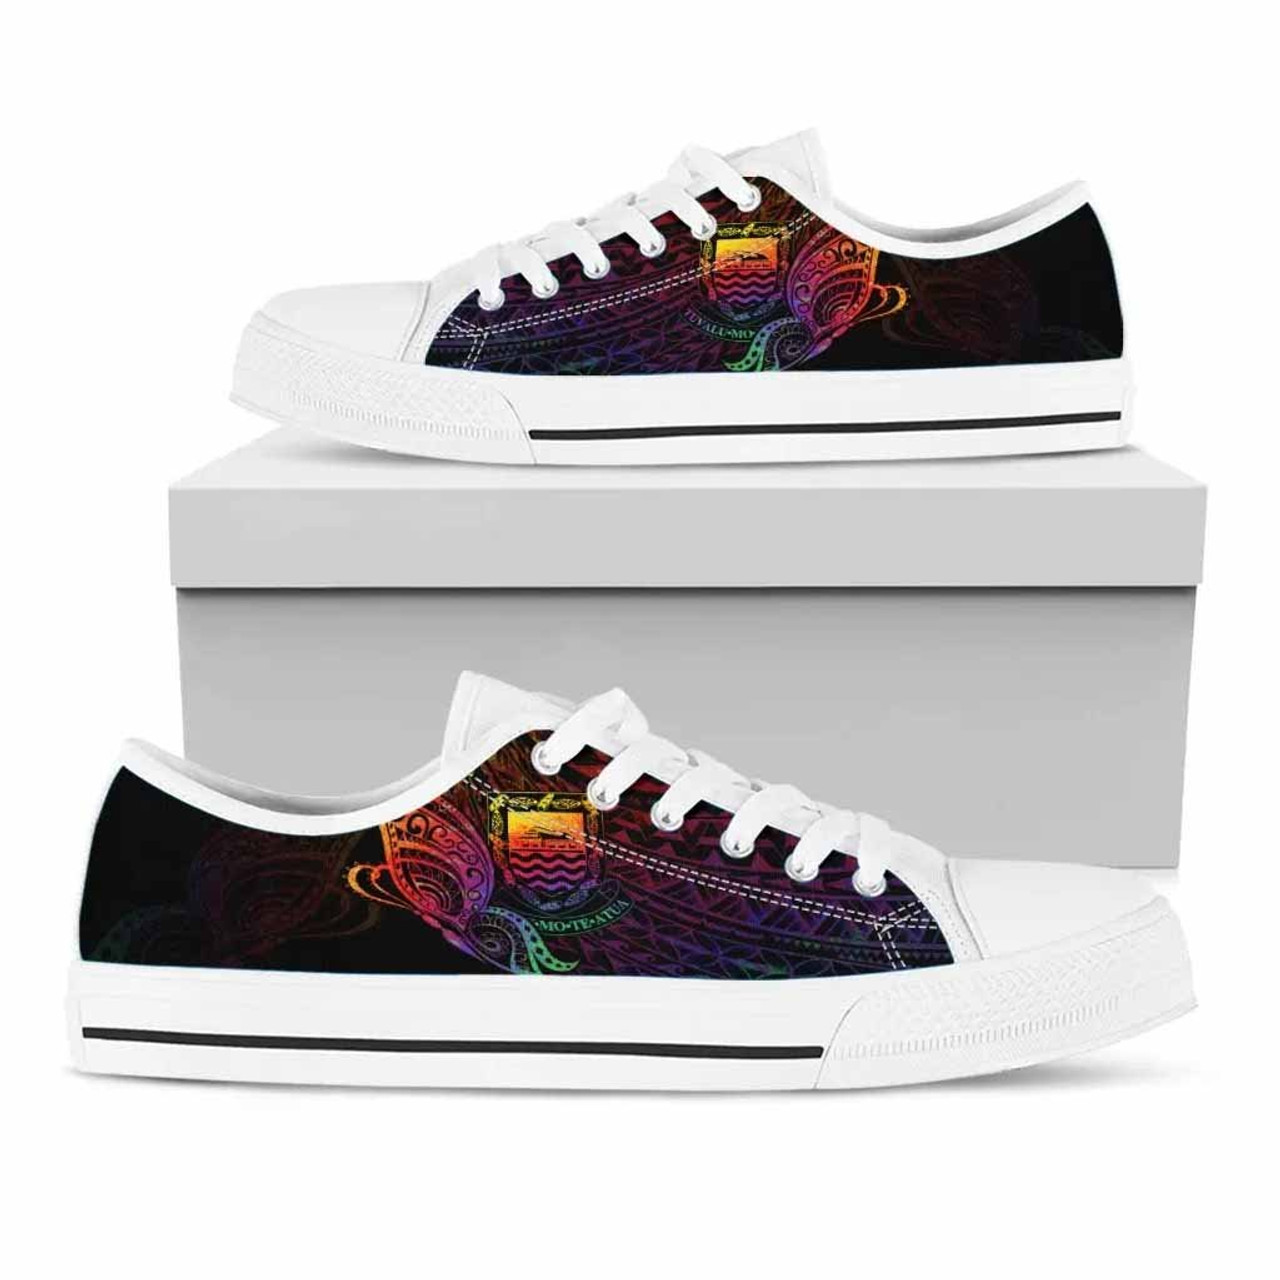 Tuvalu Low Top Shoes - Butterfly Polynesian Style 5